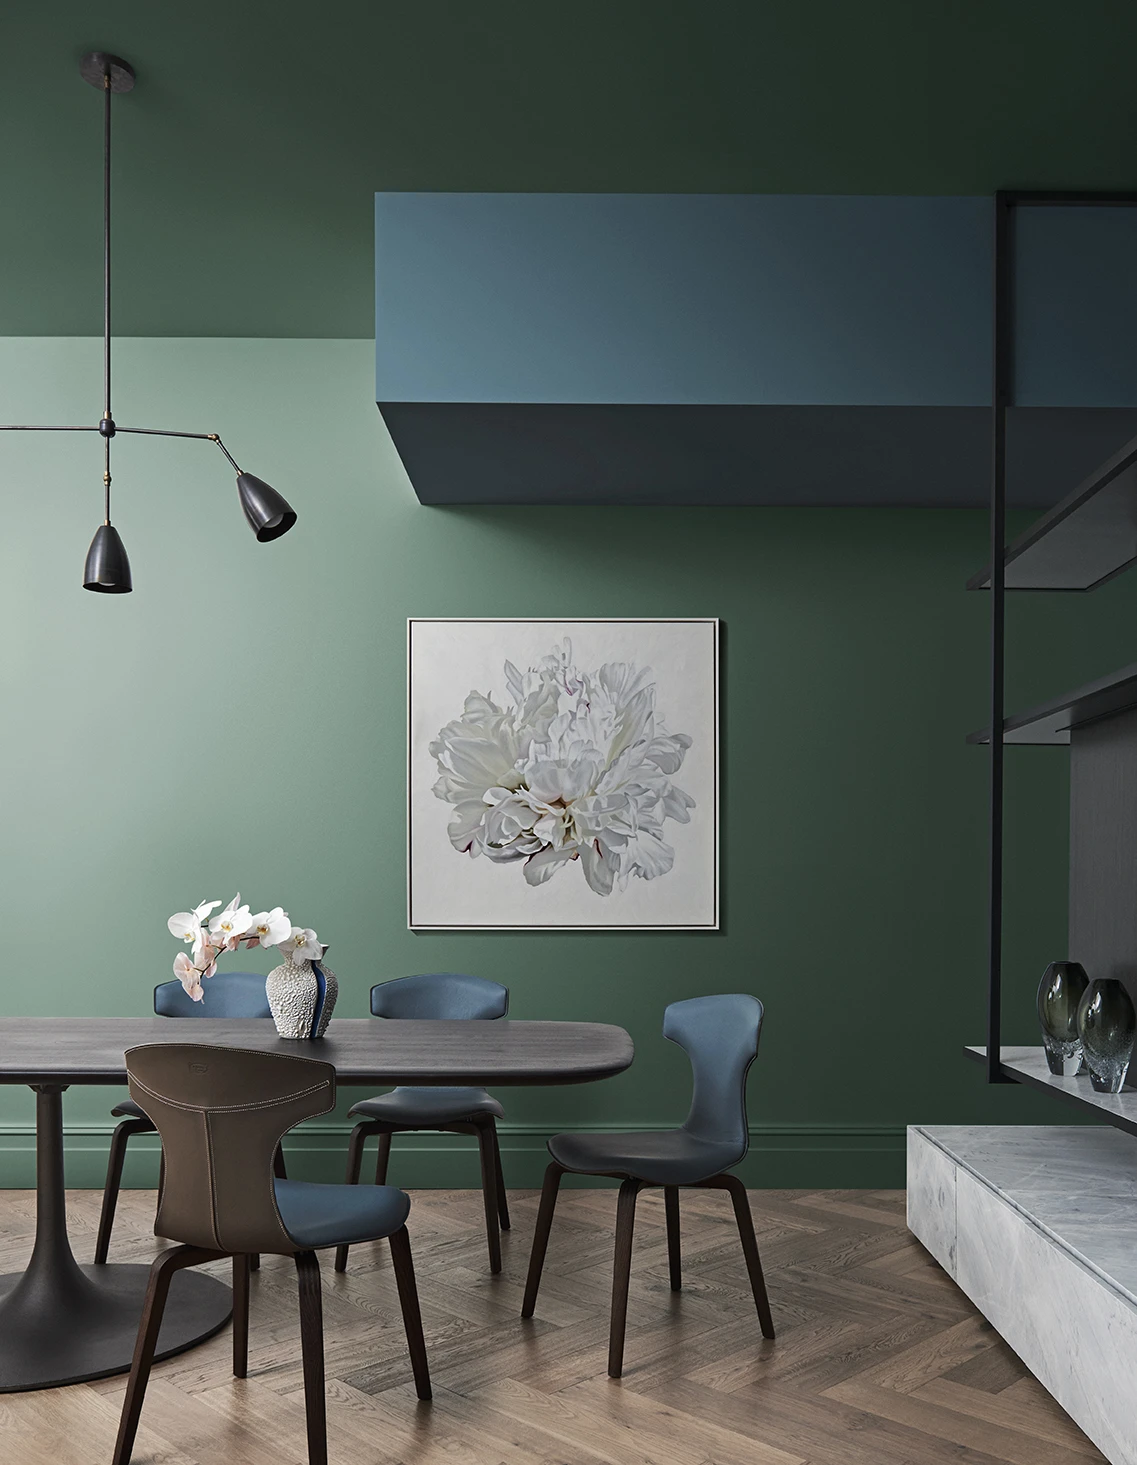 Dining room with green walls and blue bulkhead